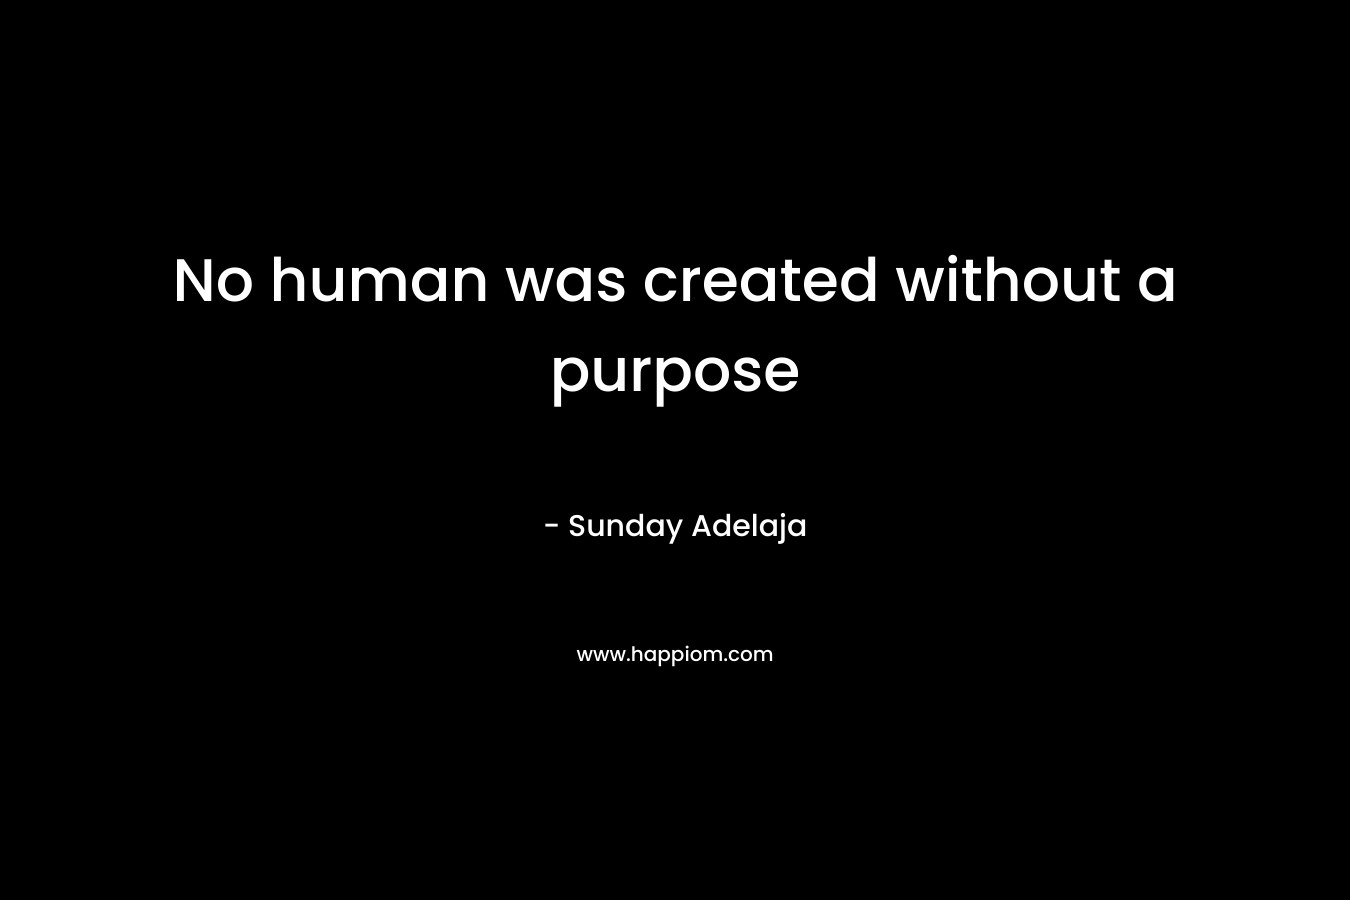 No human was created without a purpose